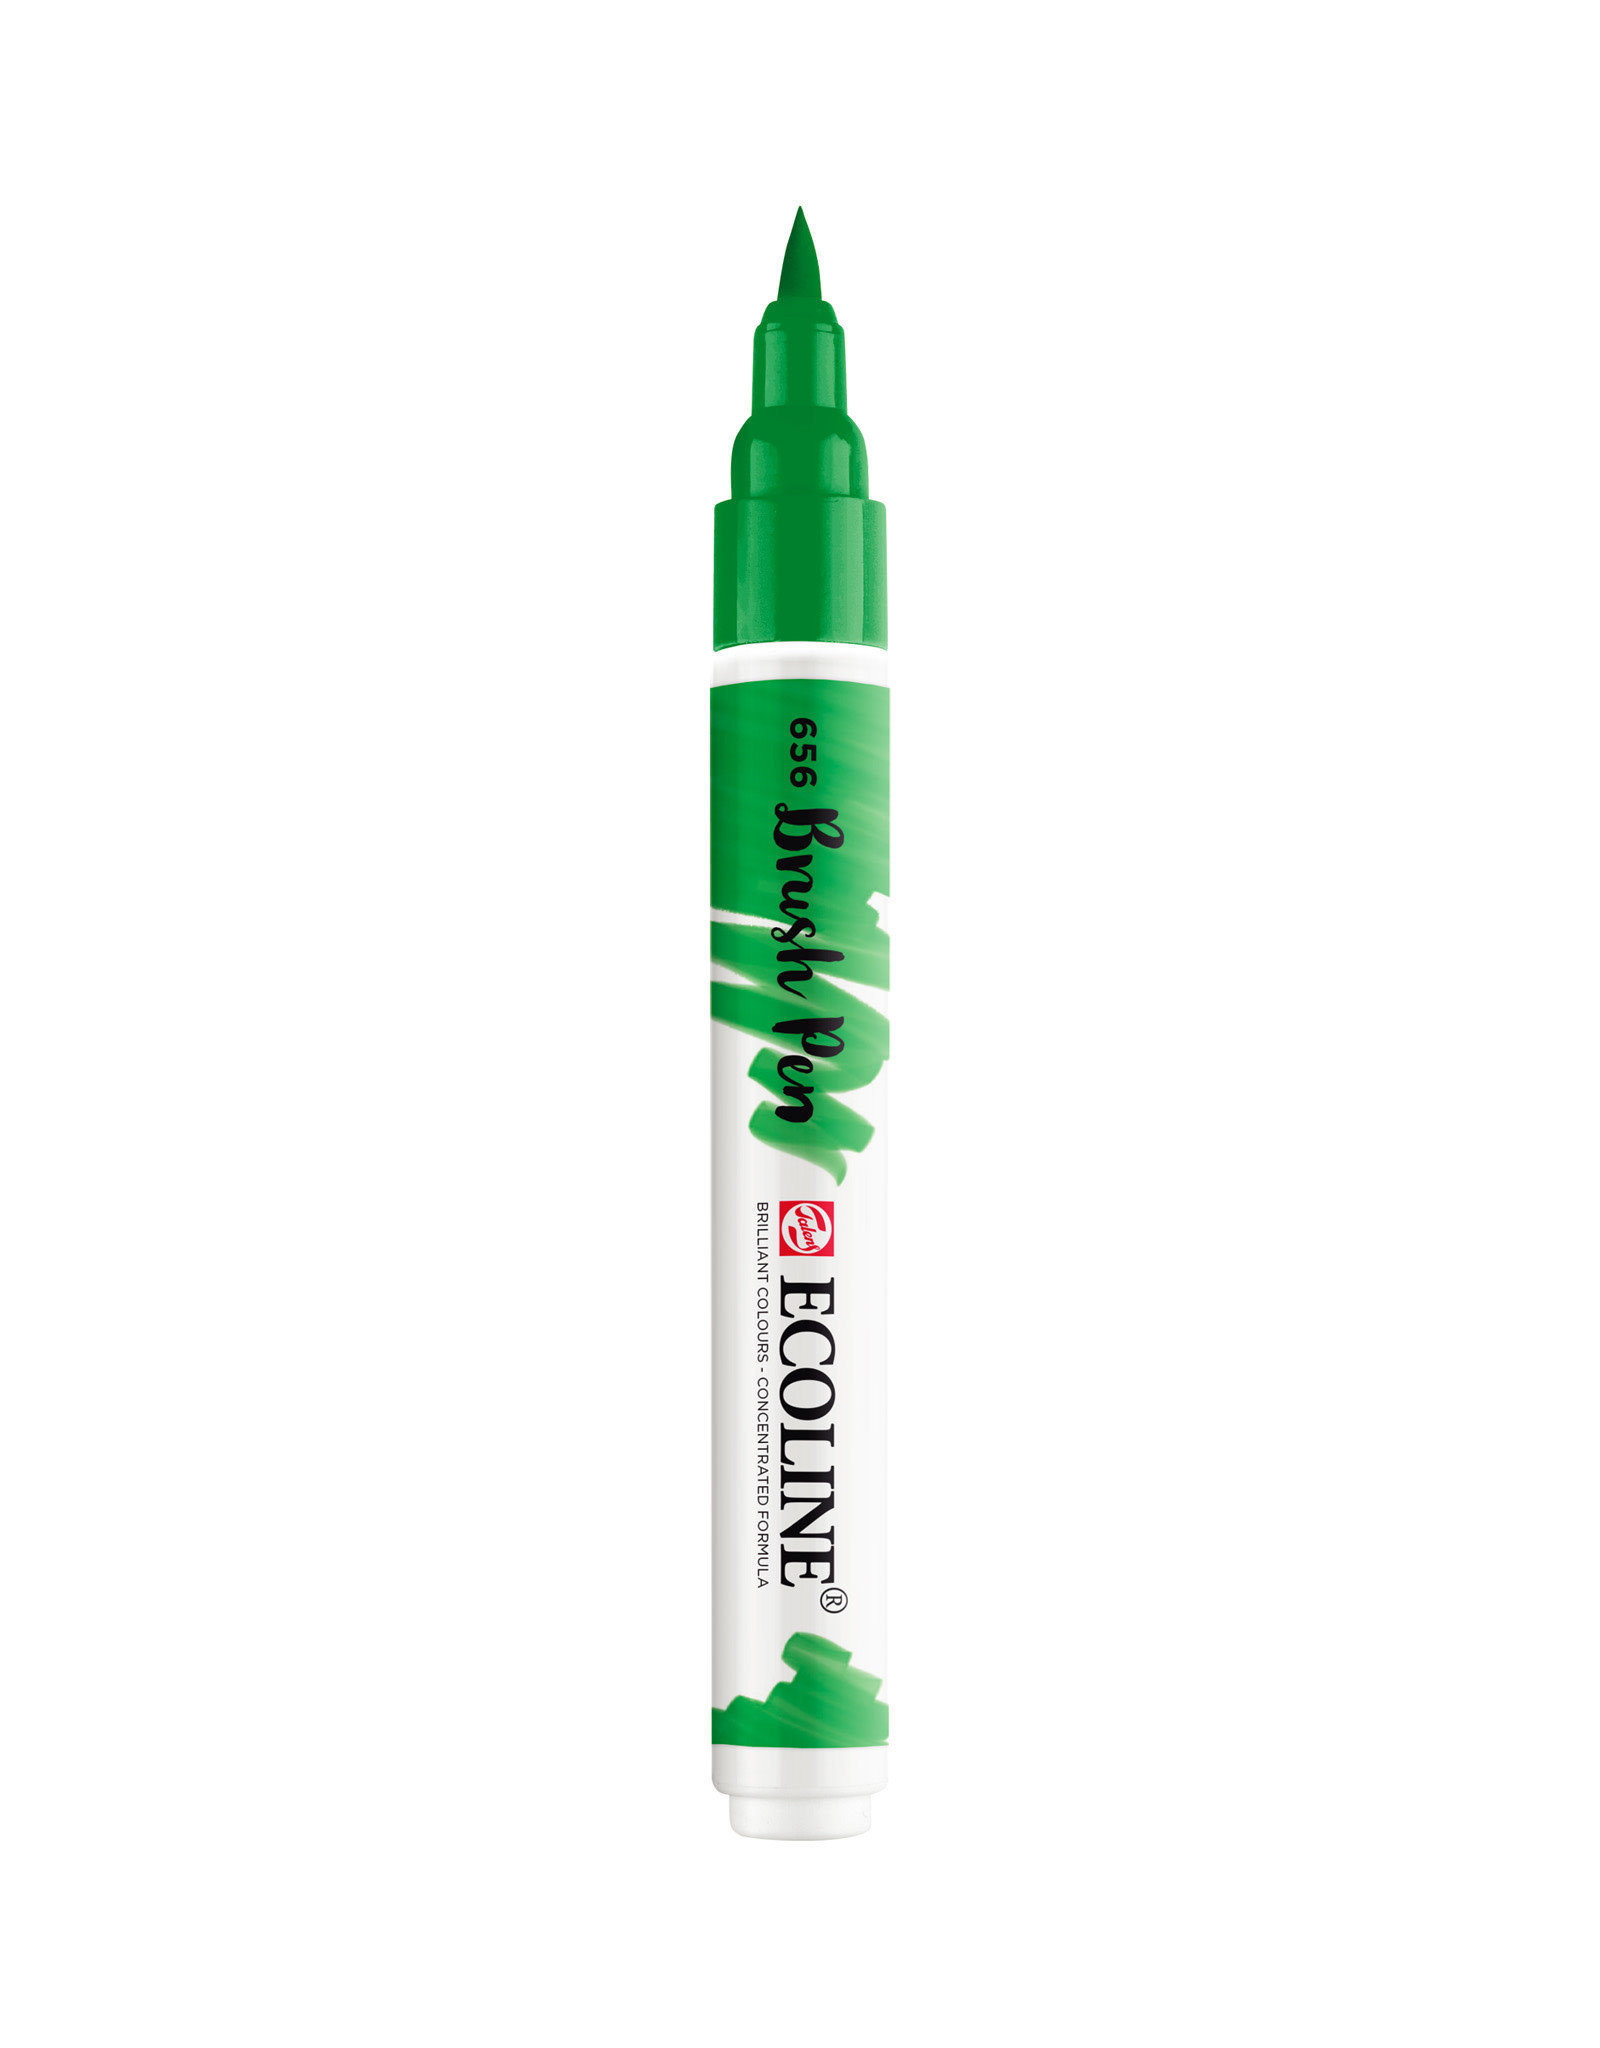 Royal Talens Ecoline Watercolour Brush Pen, Forest Green